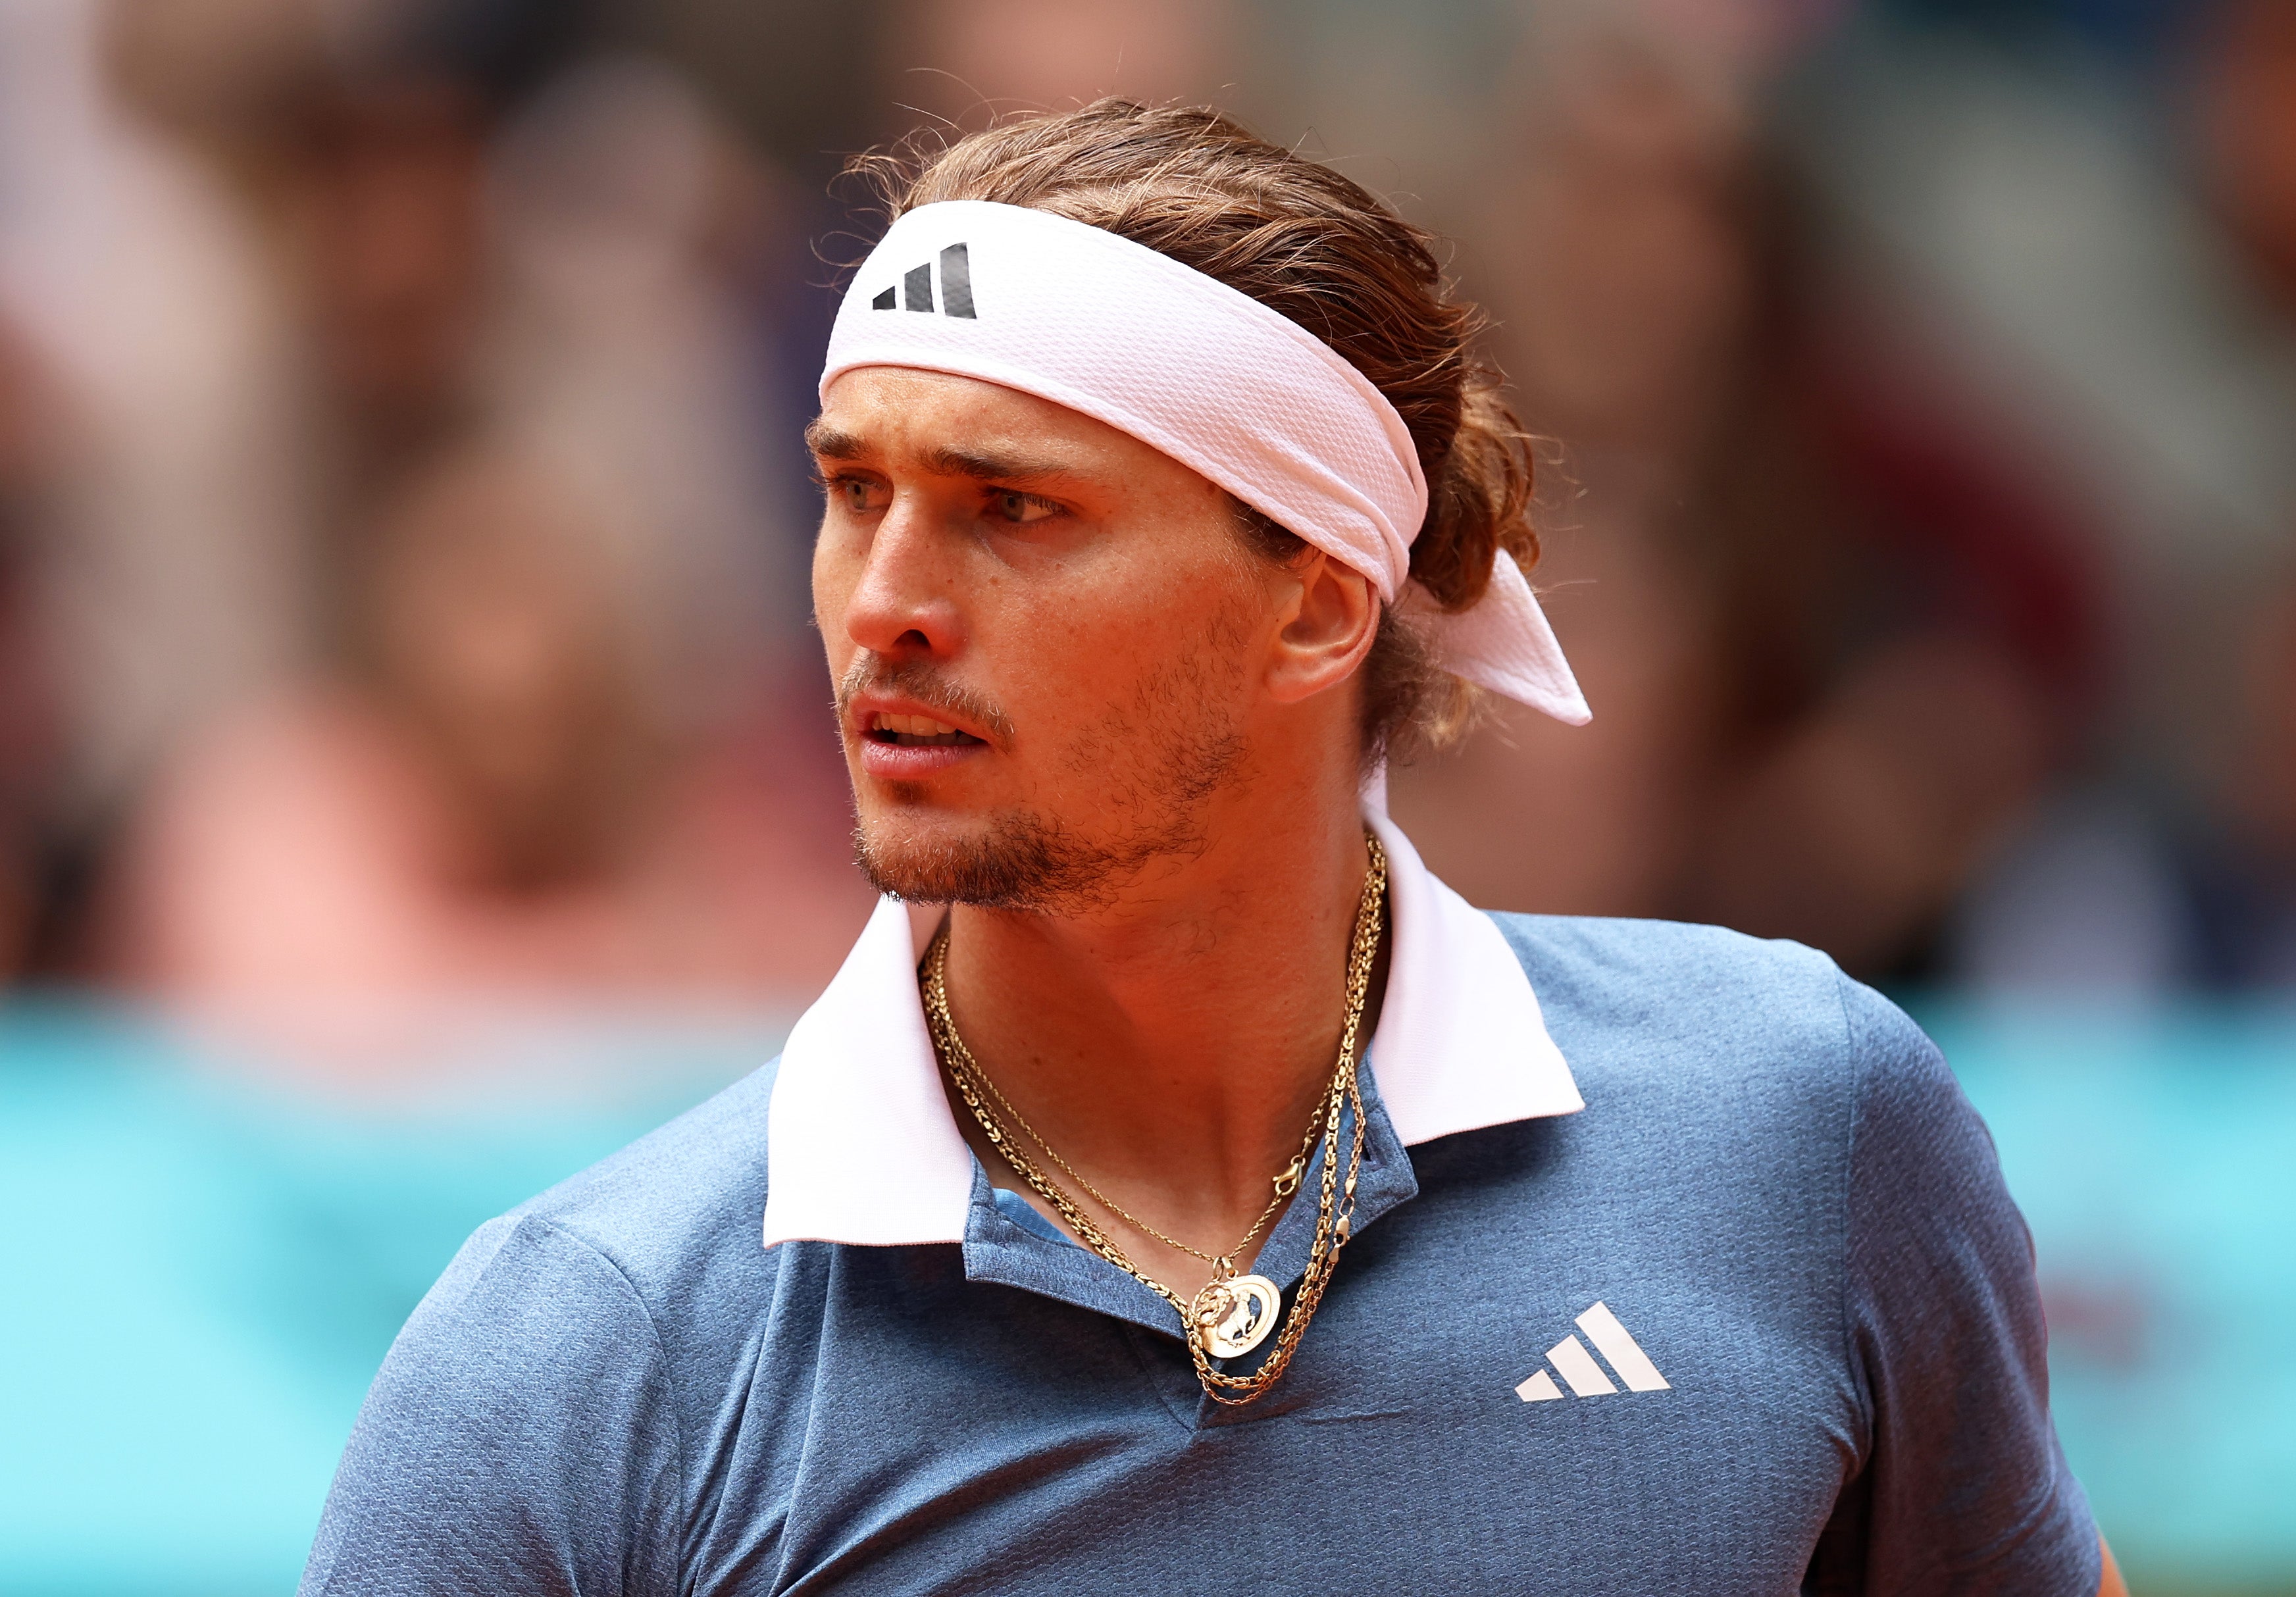 Alex Zverev isn’t happy with the current set-up of tournaments